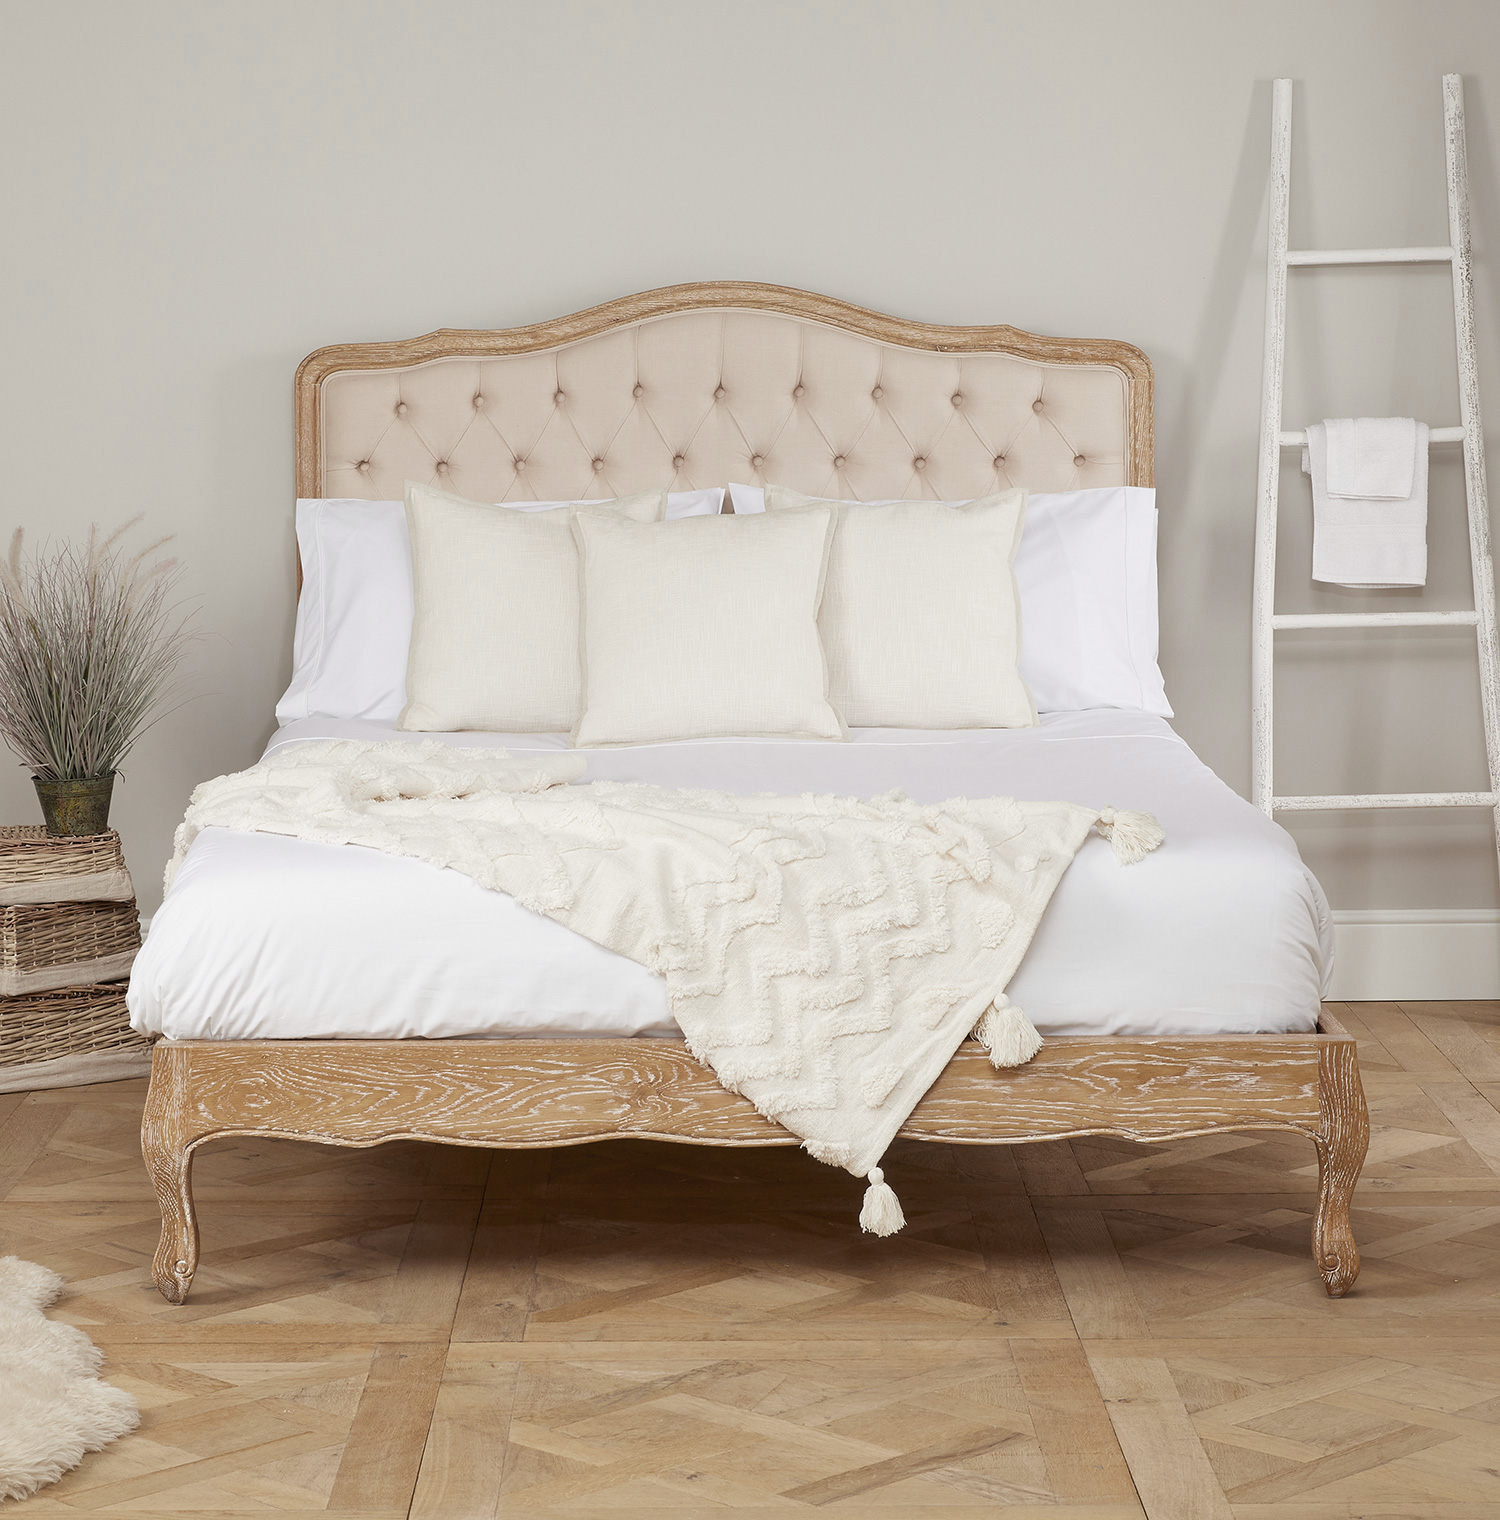 Eléa French Weathered Limed Oak Super King Size Bed with Upholstered Button Back Headboard